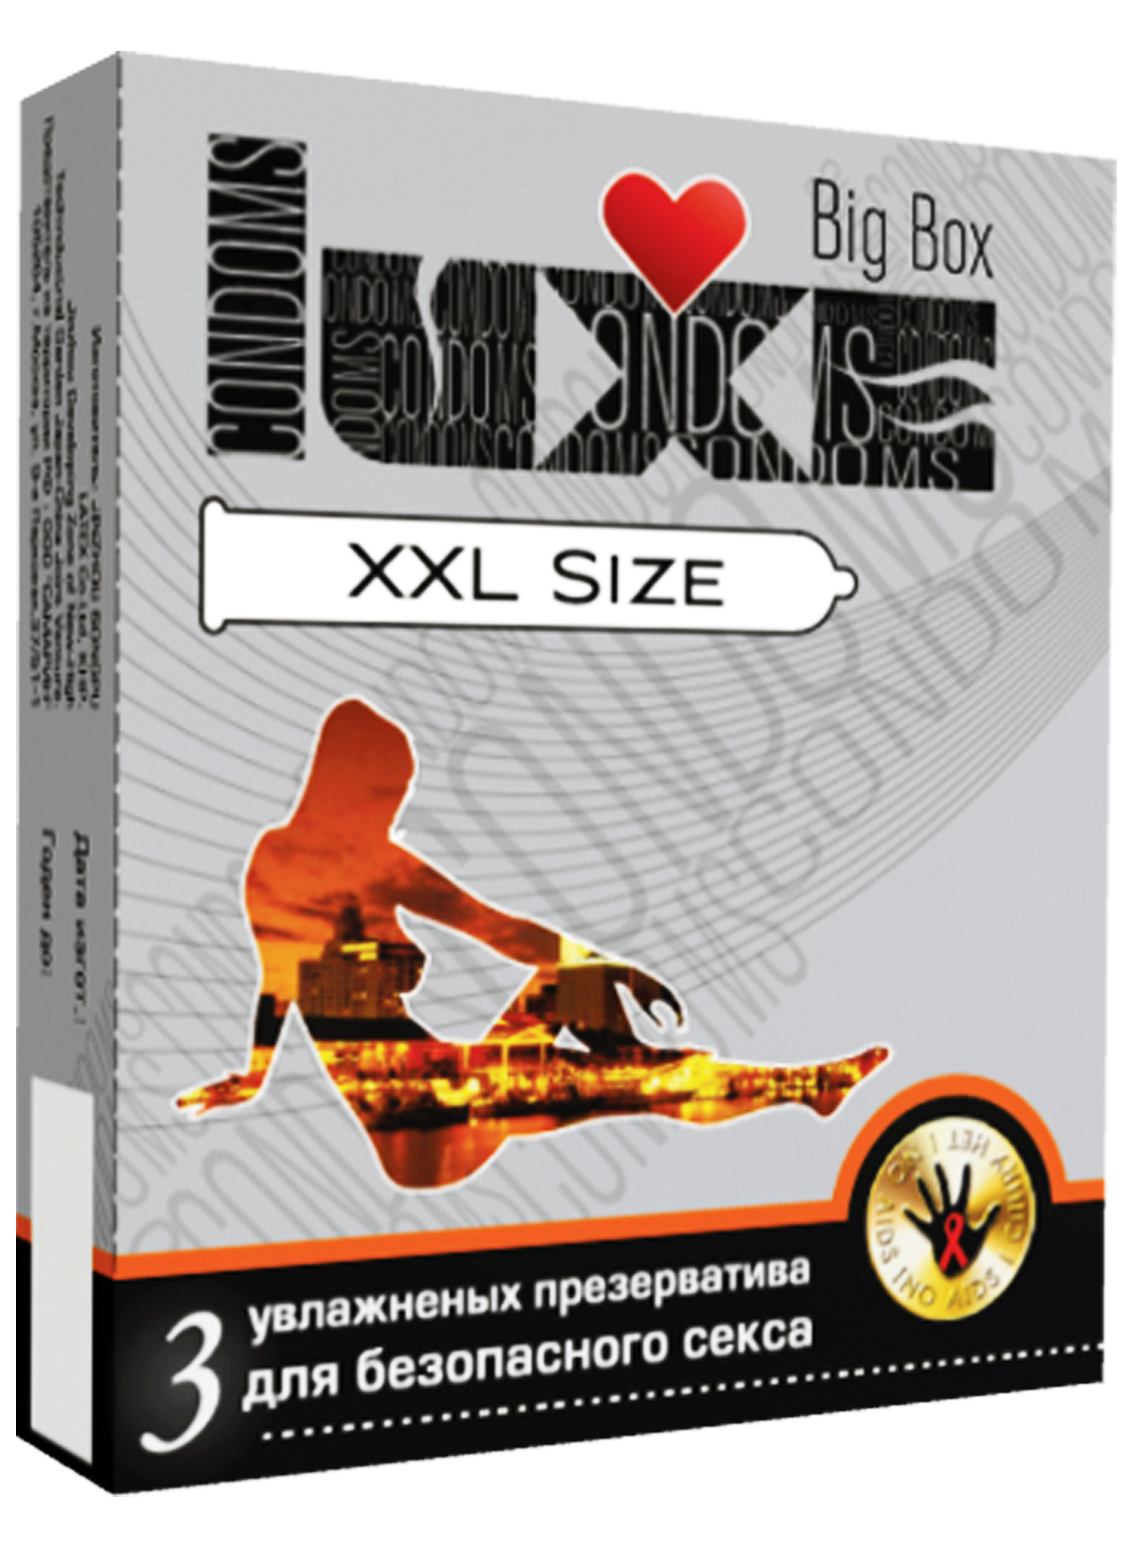 Luxe XXL Size